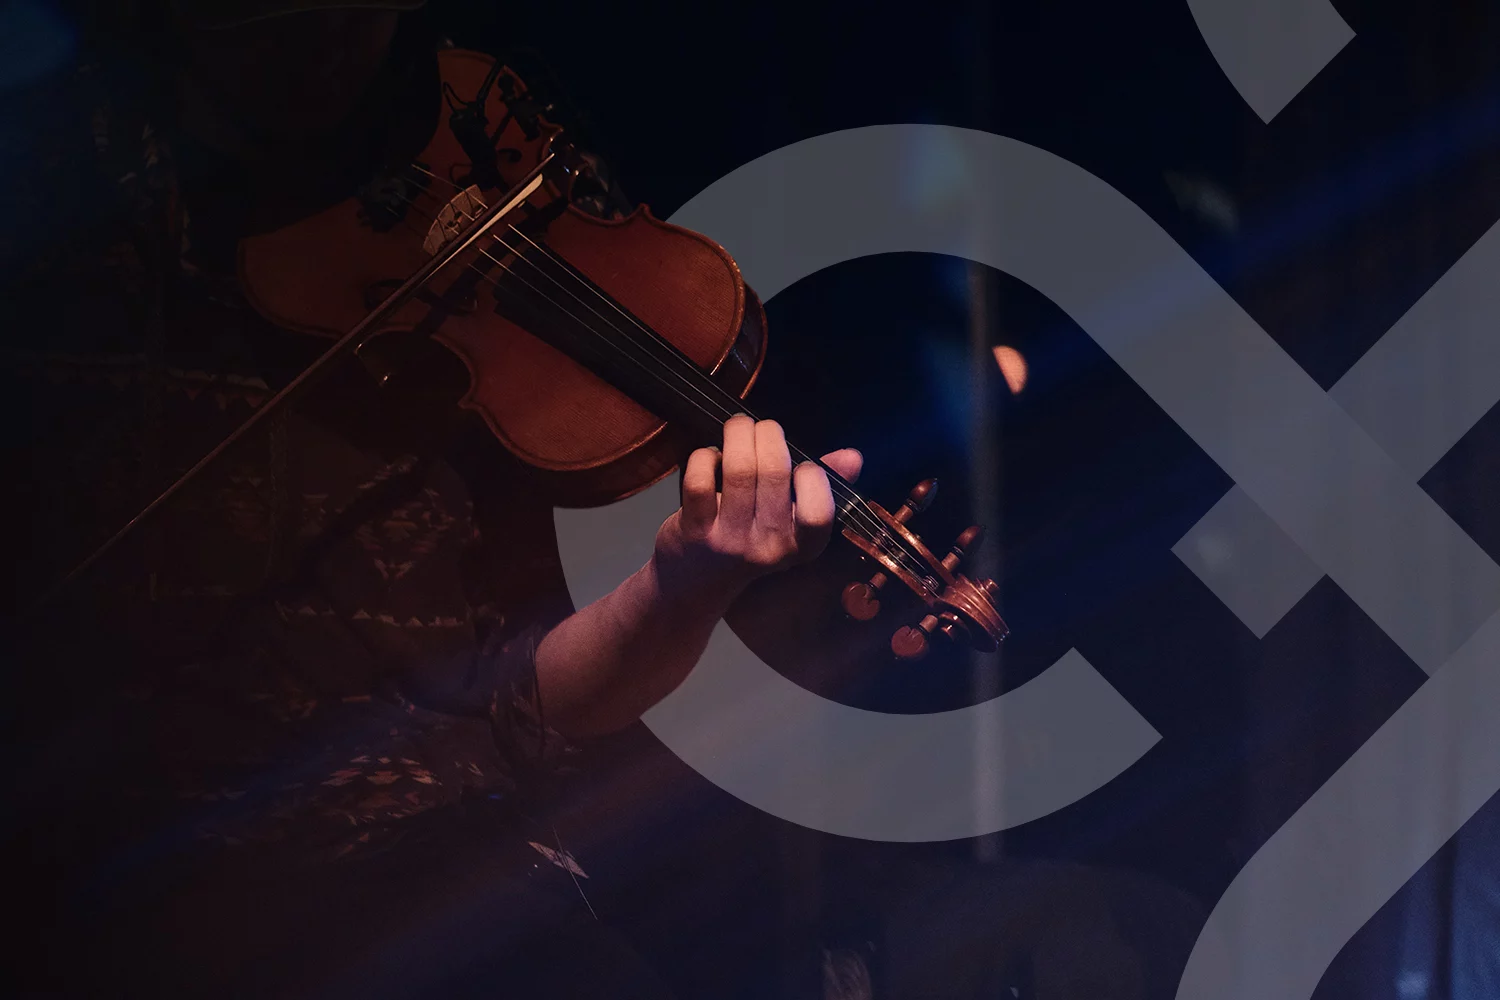 A musician playing the fiddle with the IDTANA logo interwoven.